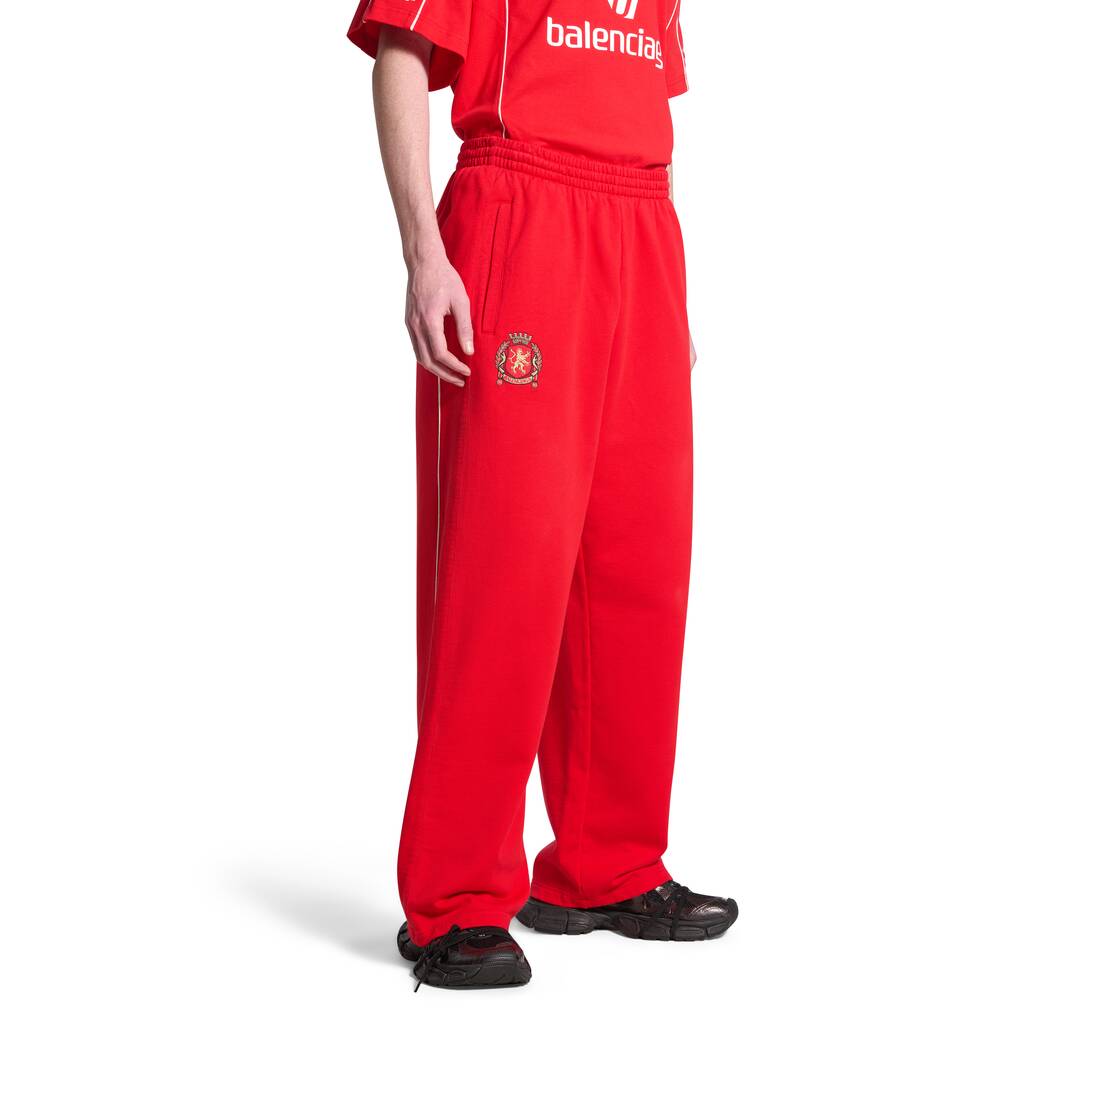 Soccer Baggy Sweatpants in Red/white | Balenciaga US